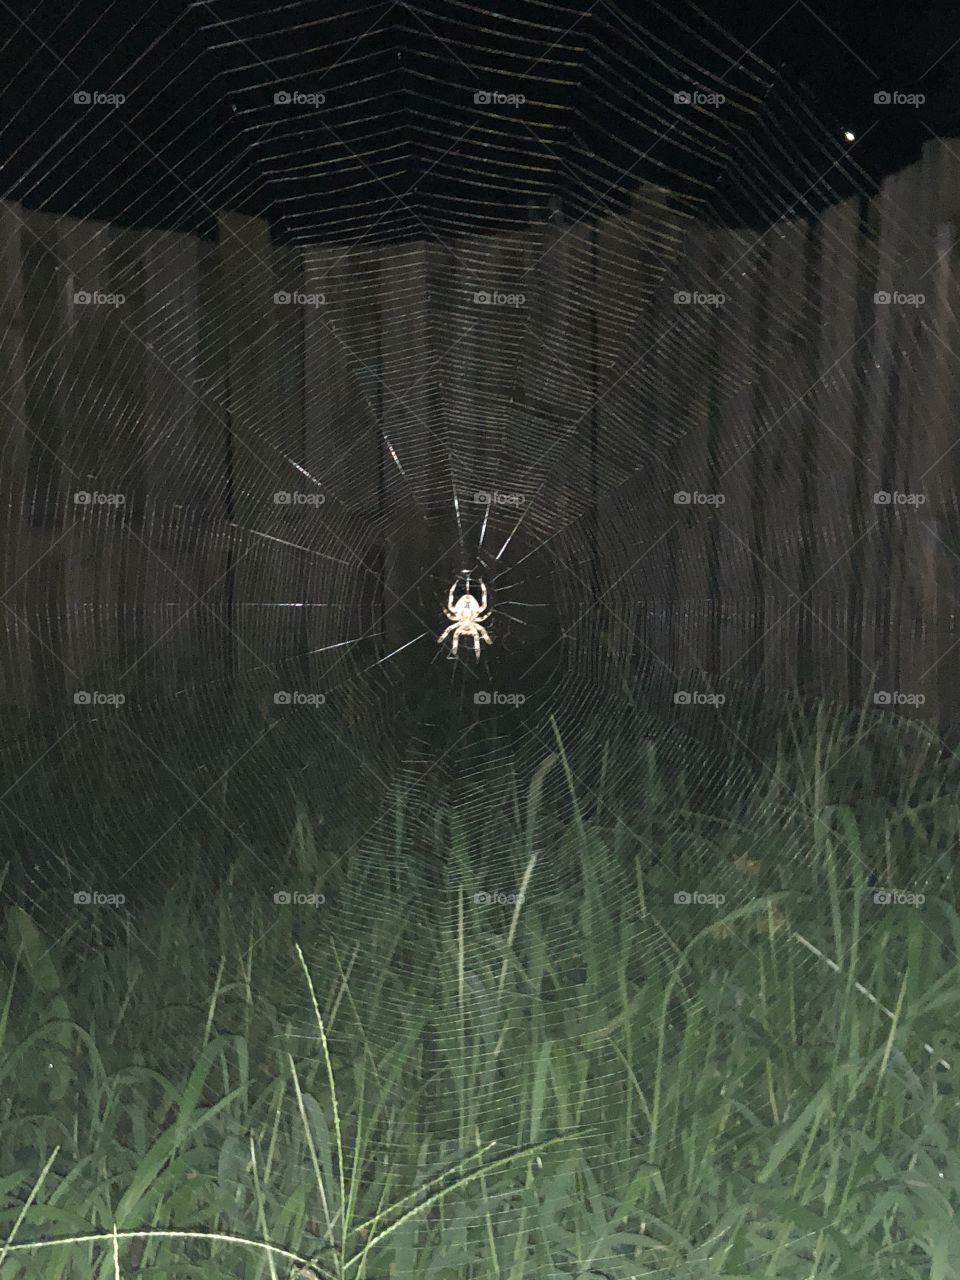 Spider-Man of the backyard